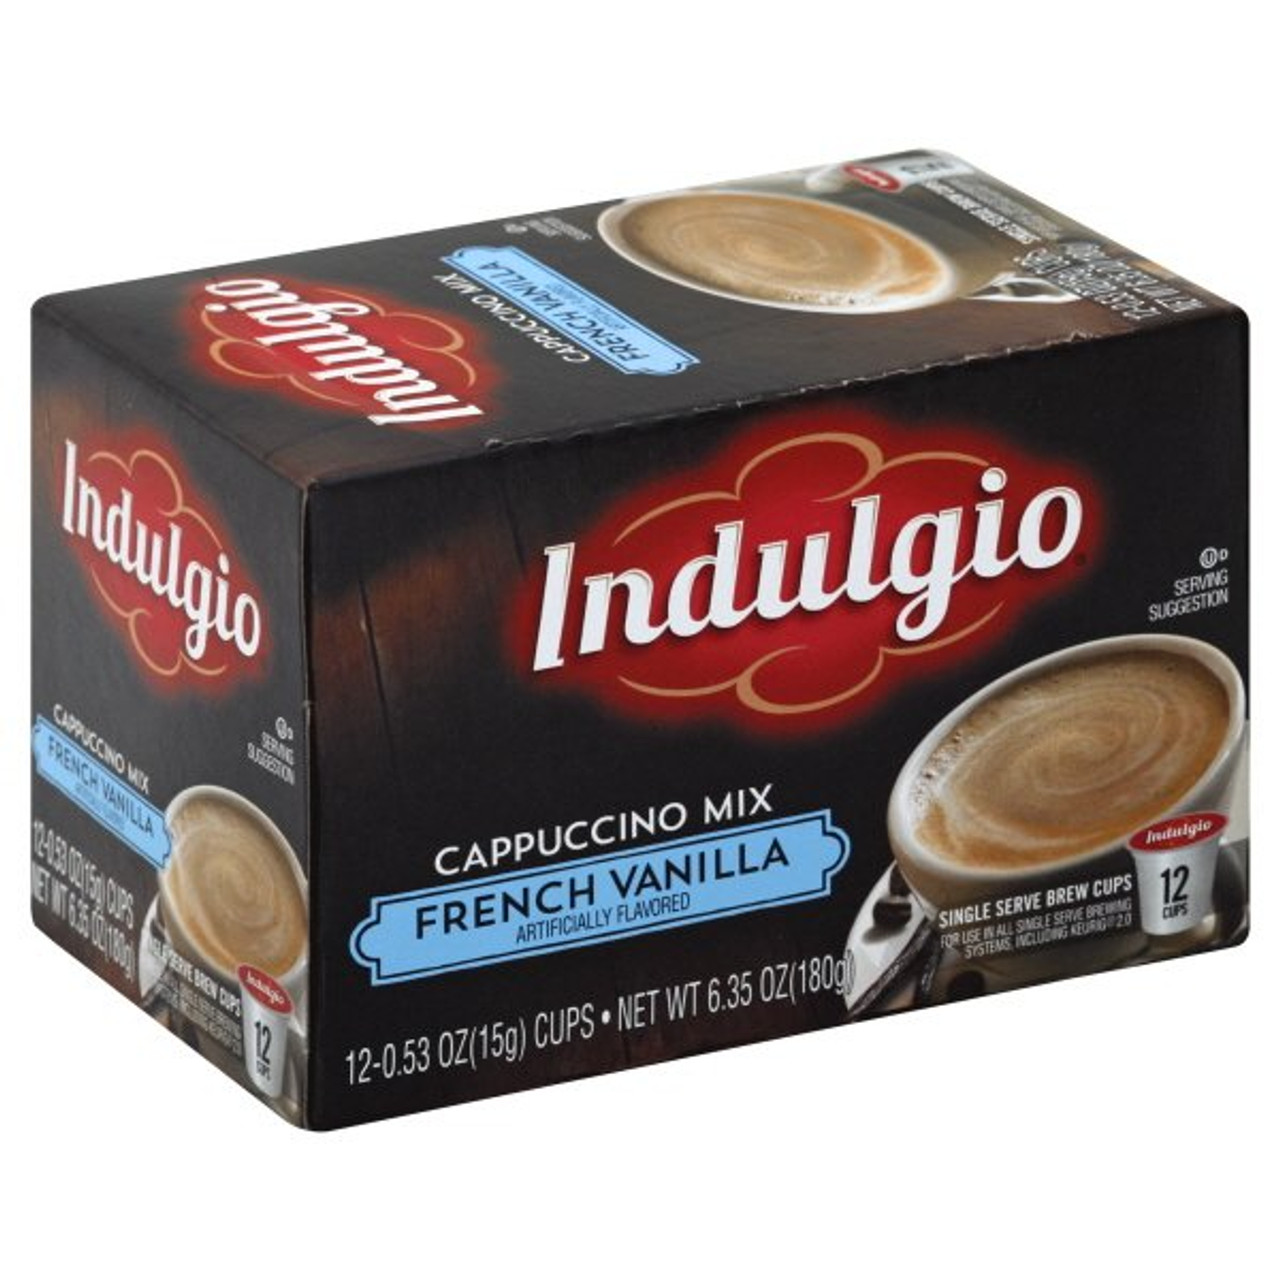 Cappuccino vanille française, capsules K-Cup